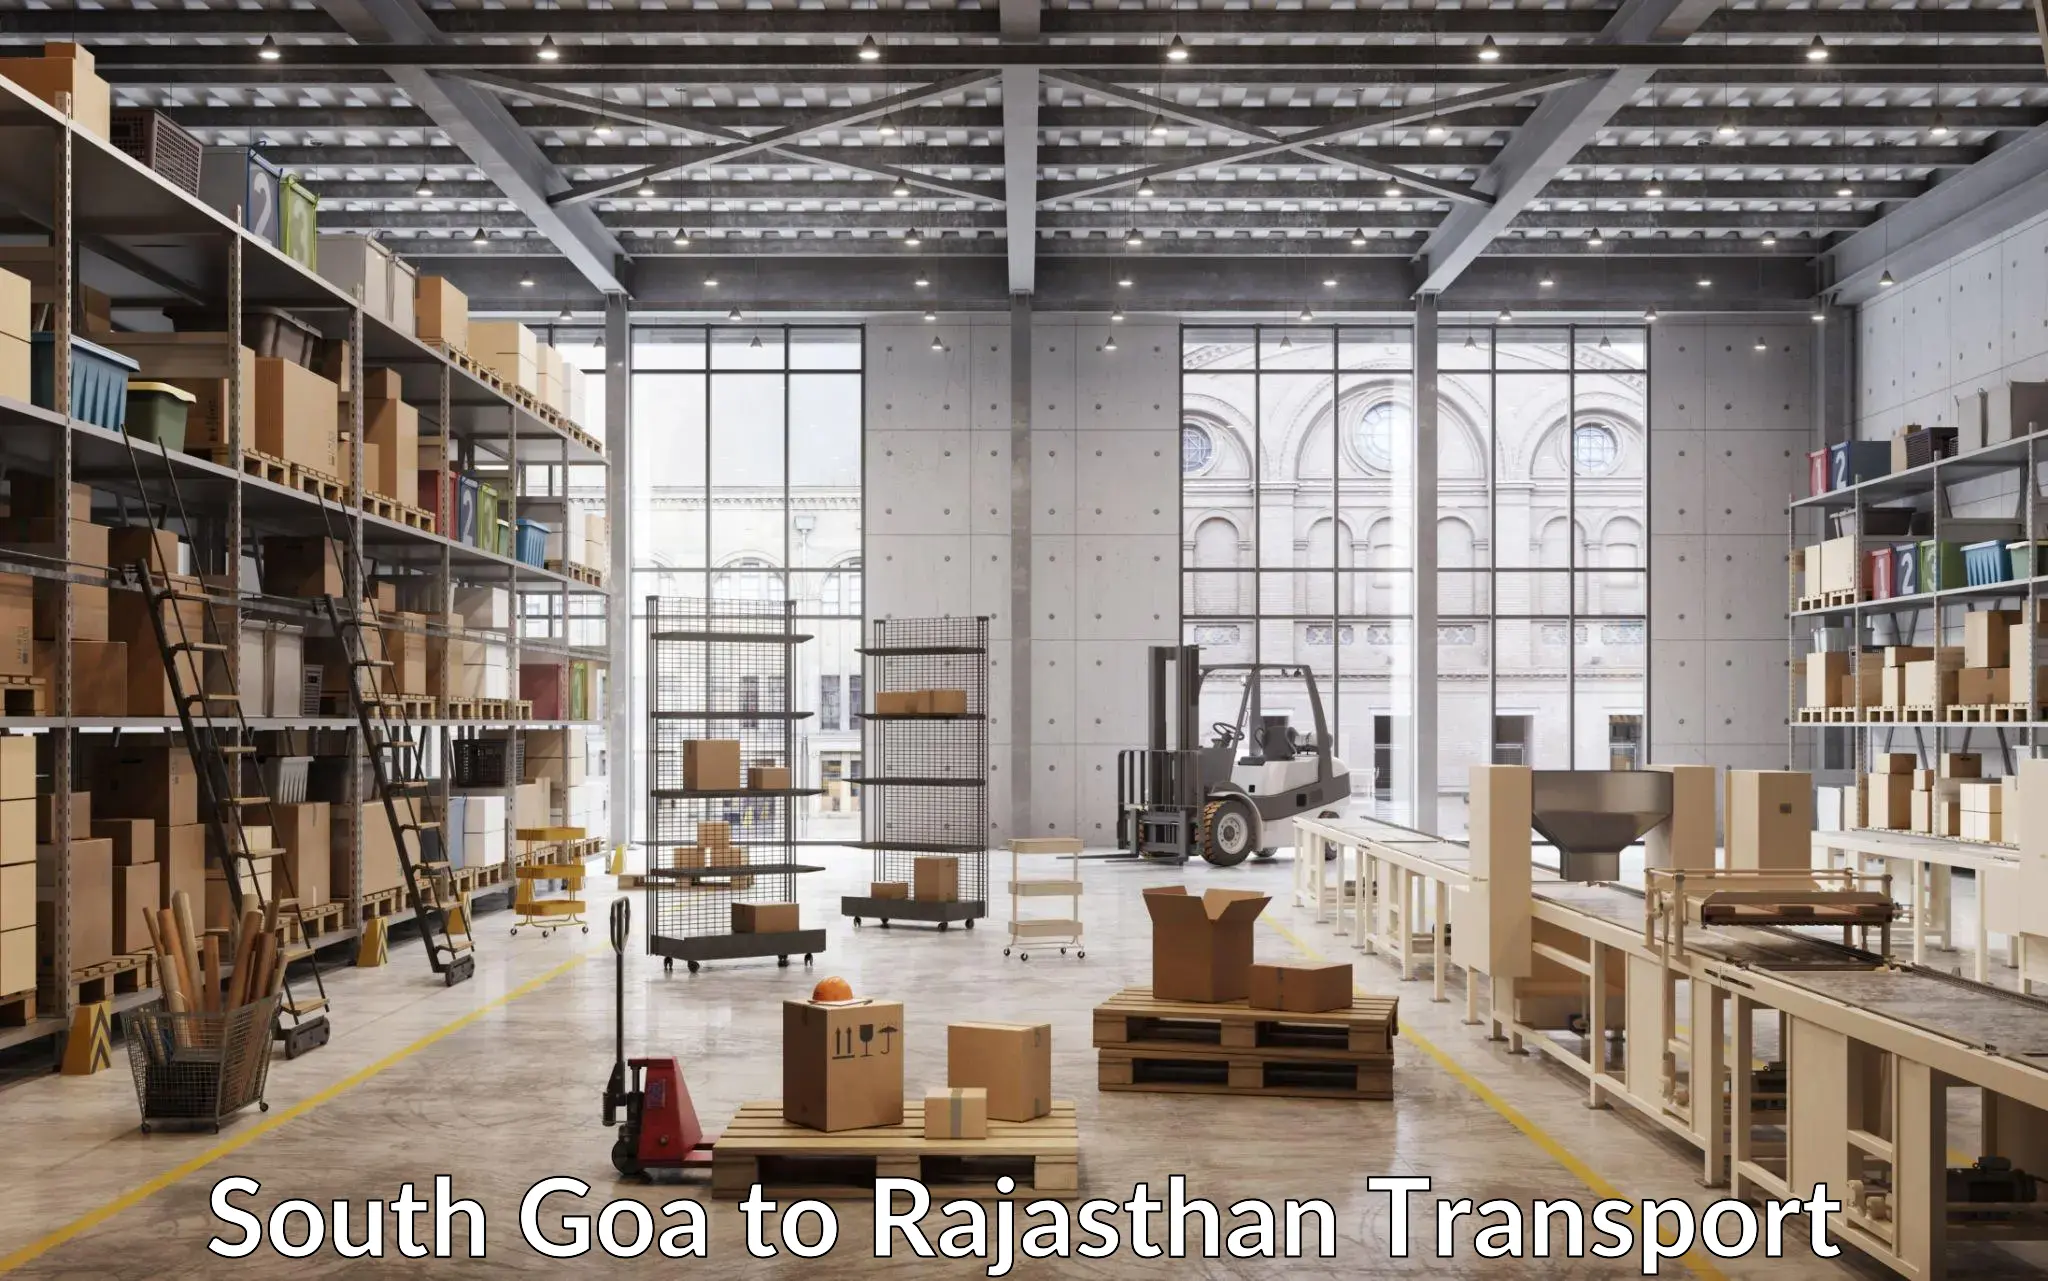 Commercial transport service South Goa to Rajasthan